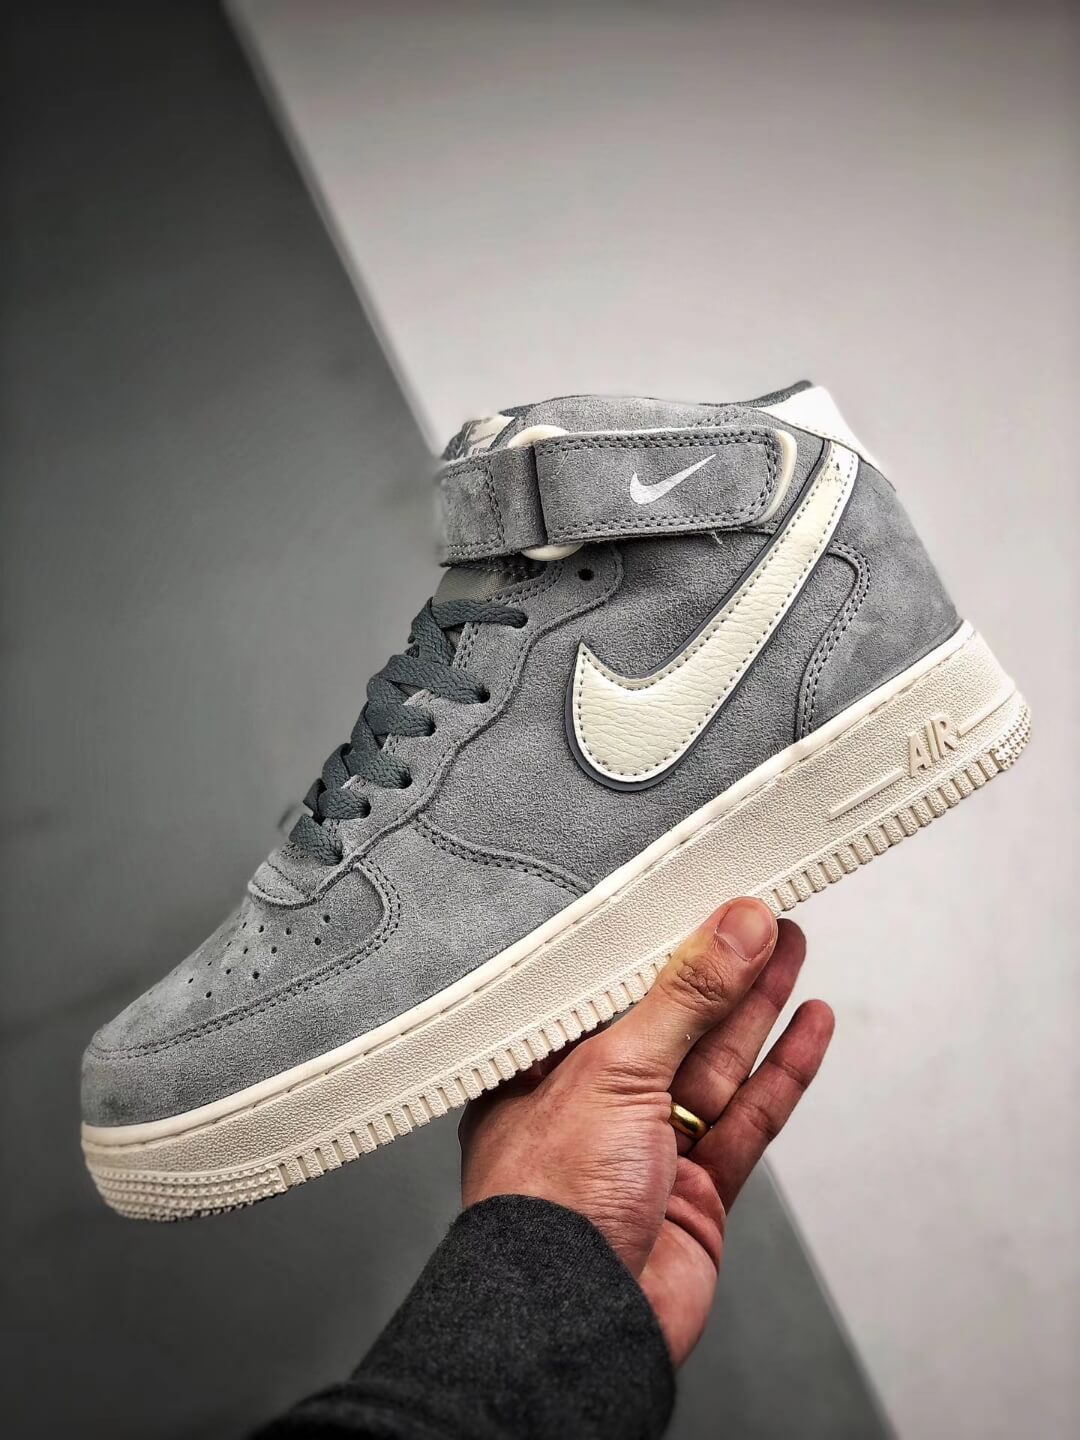 nike air force 1 mid suede